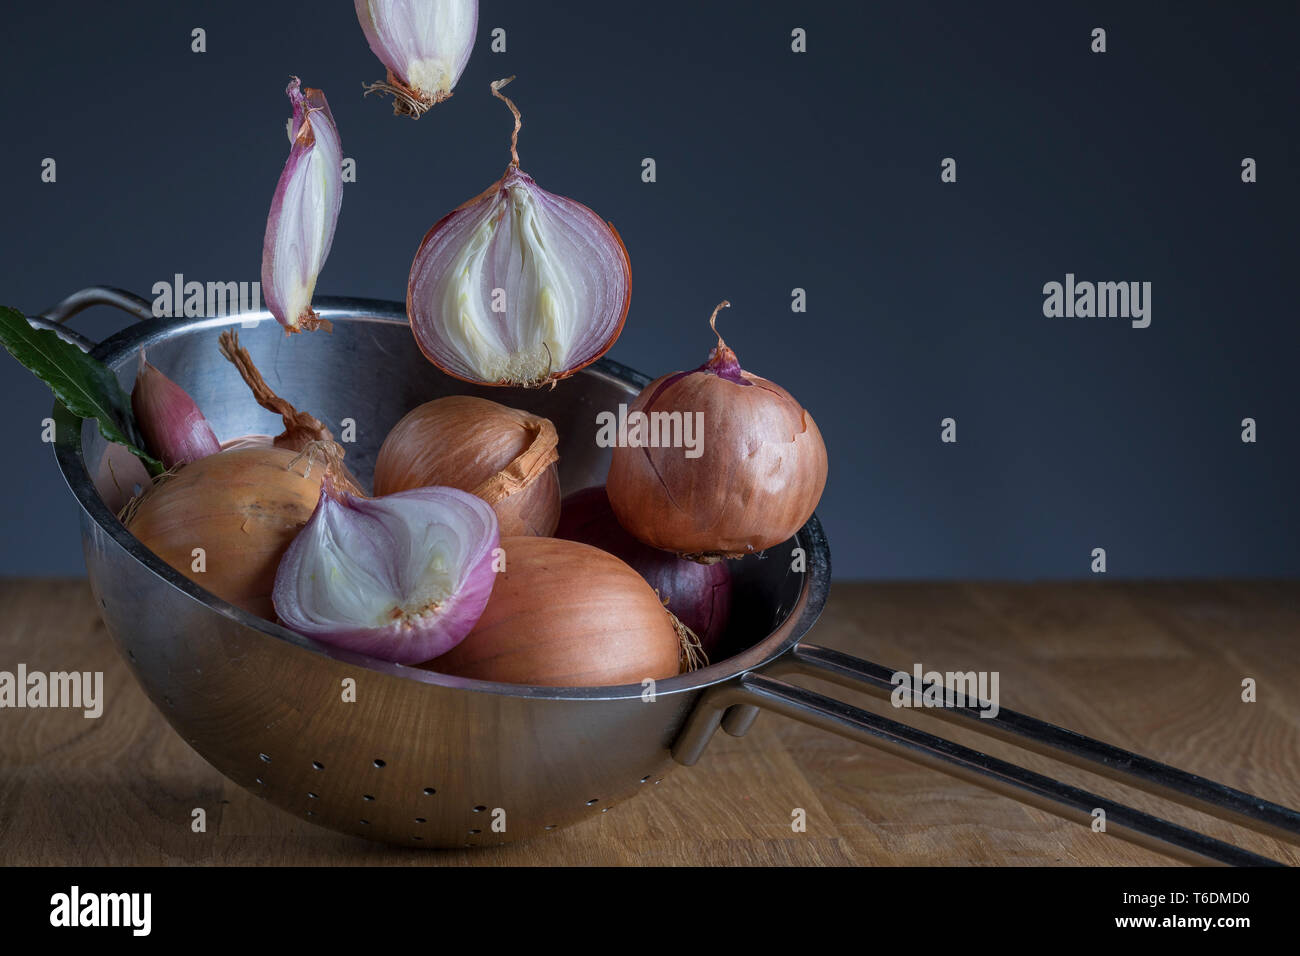 Onions tumbling into a sieve Stock Photo